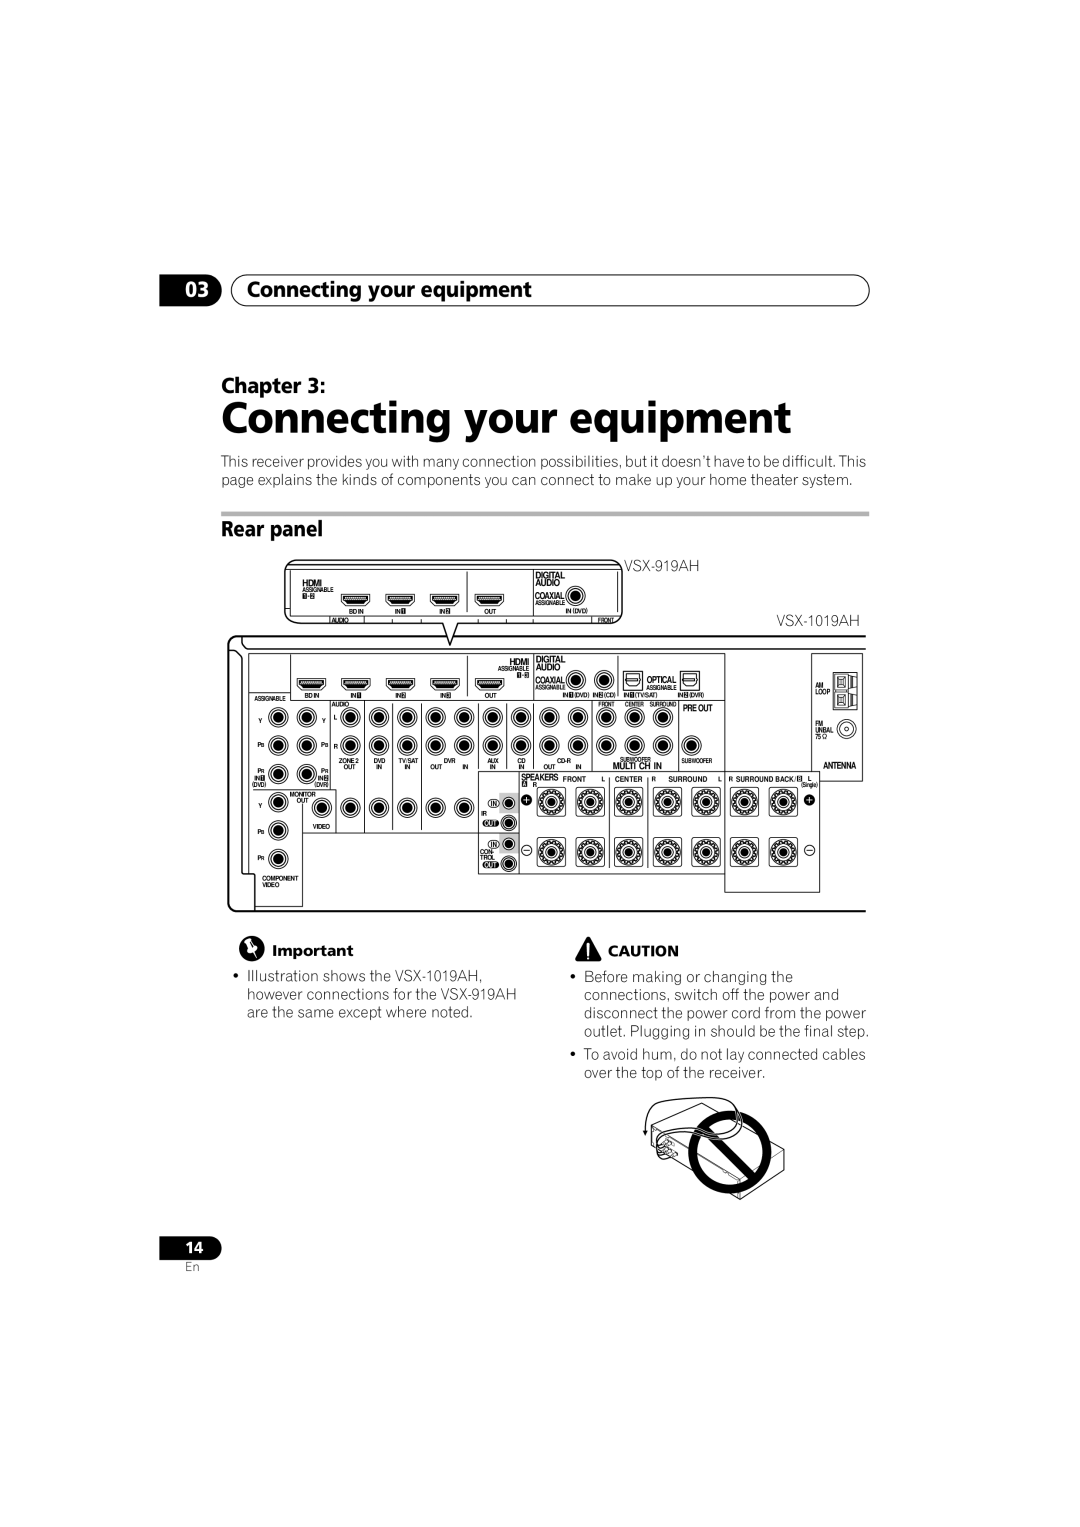 Pioneer VSX-919AH-S manual 03Connecting your equipment Chapter, Rear panel 